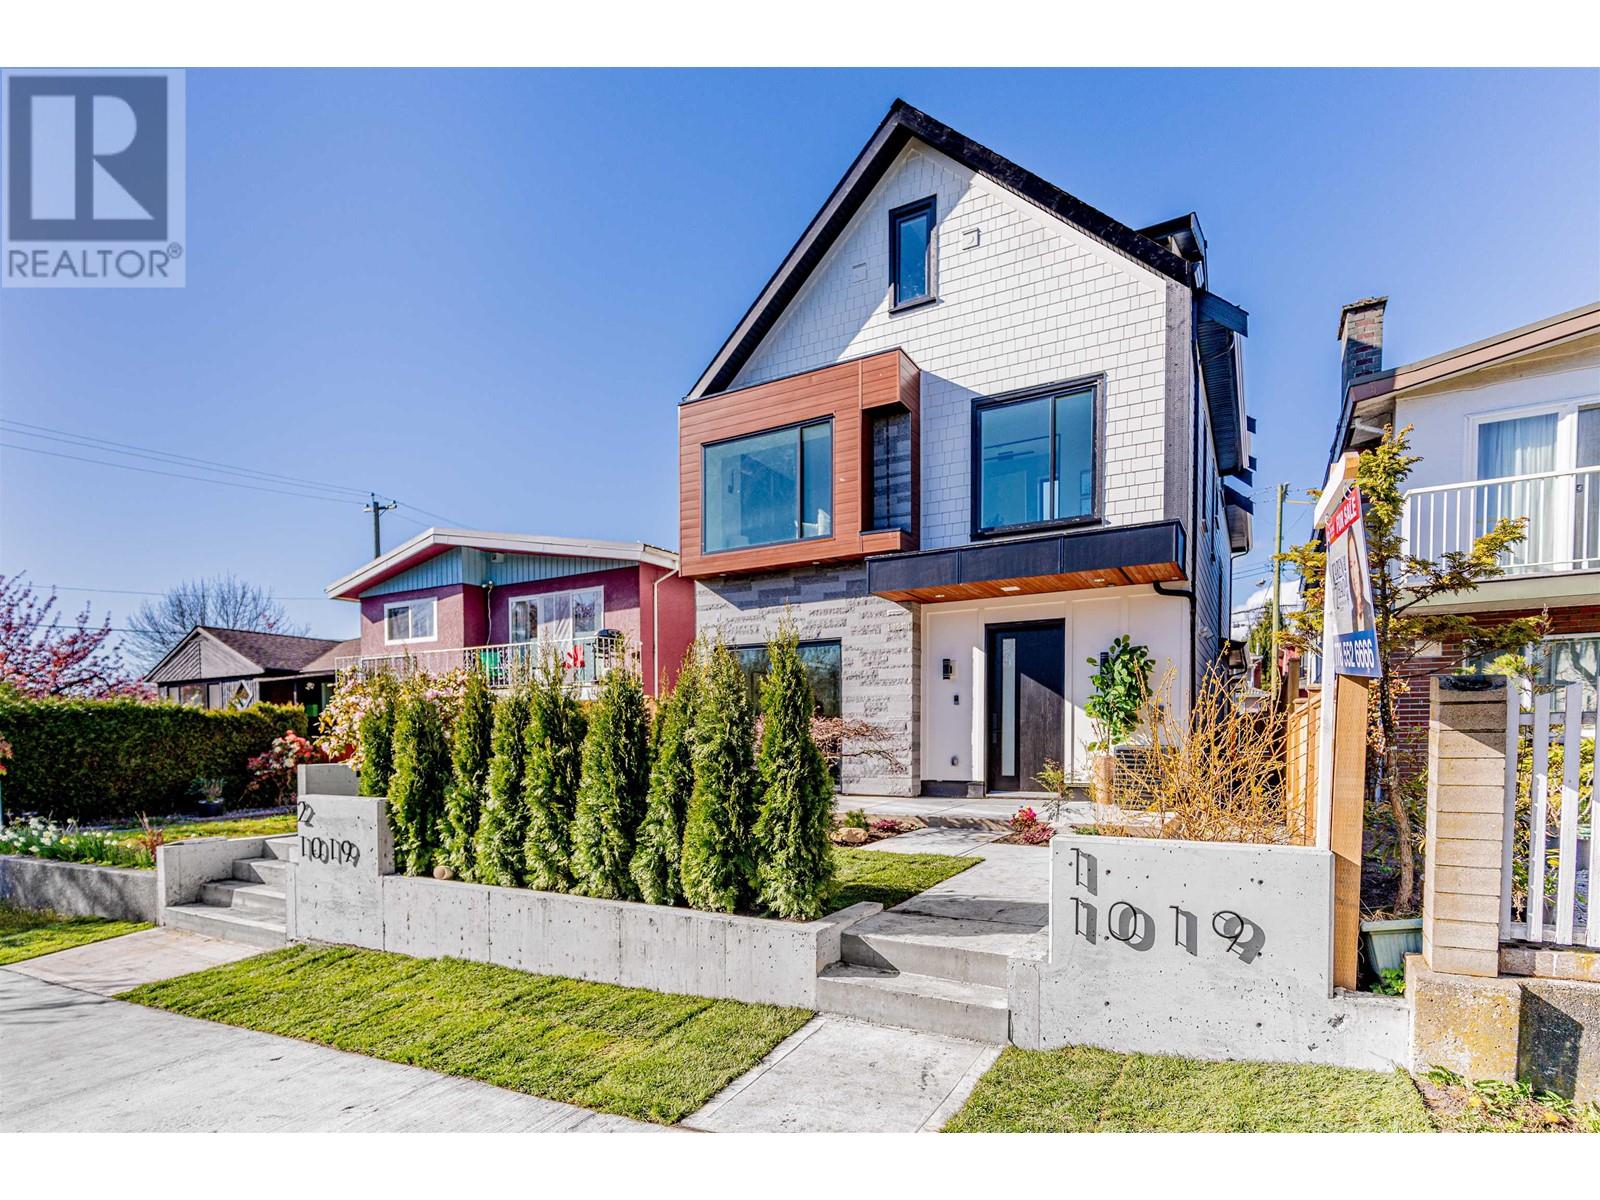 Listing Picture 31 of 33 : 1 1019 39TH AVENUE, Vancouver / 溫哥華 - 魯藝地產 Yvonne Lu Group - MLS Medallion Club Member